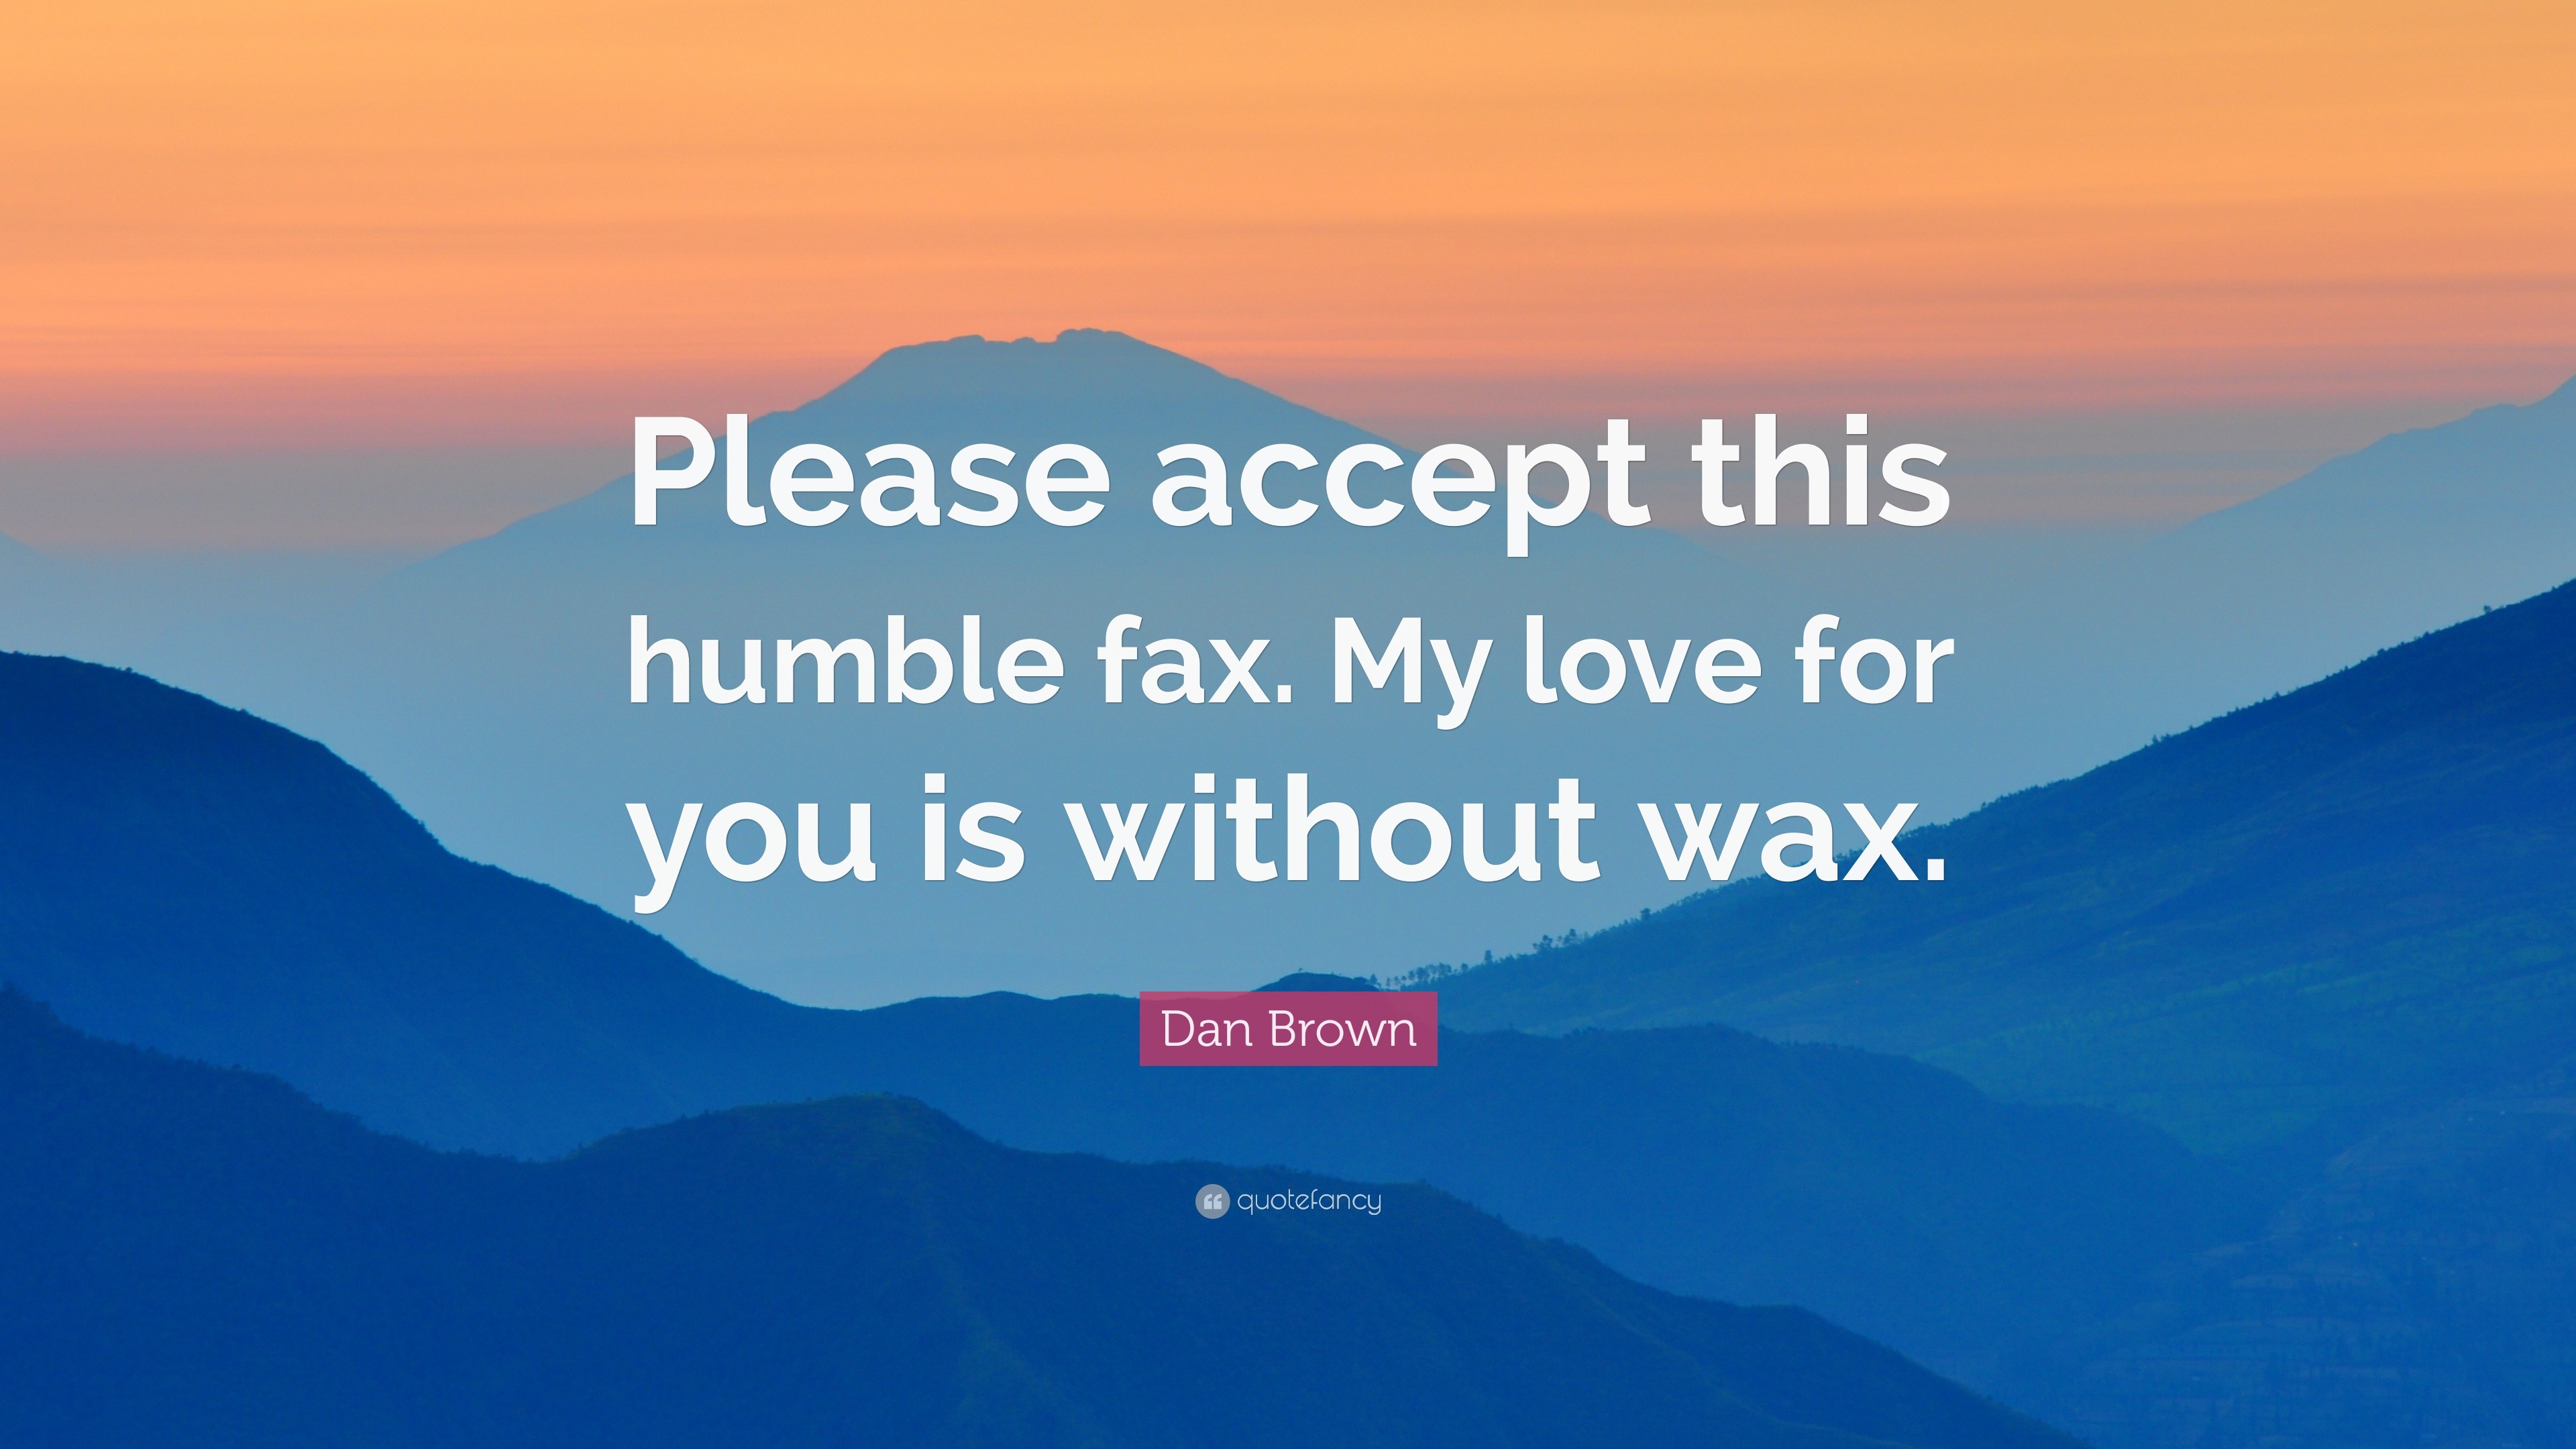 Dan Brown Quote “Please accept this humble fax My love for you is